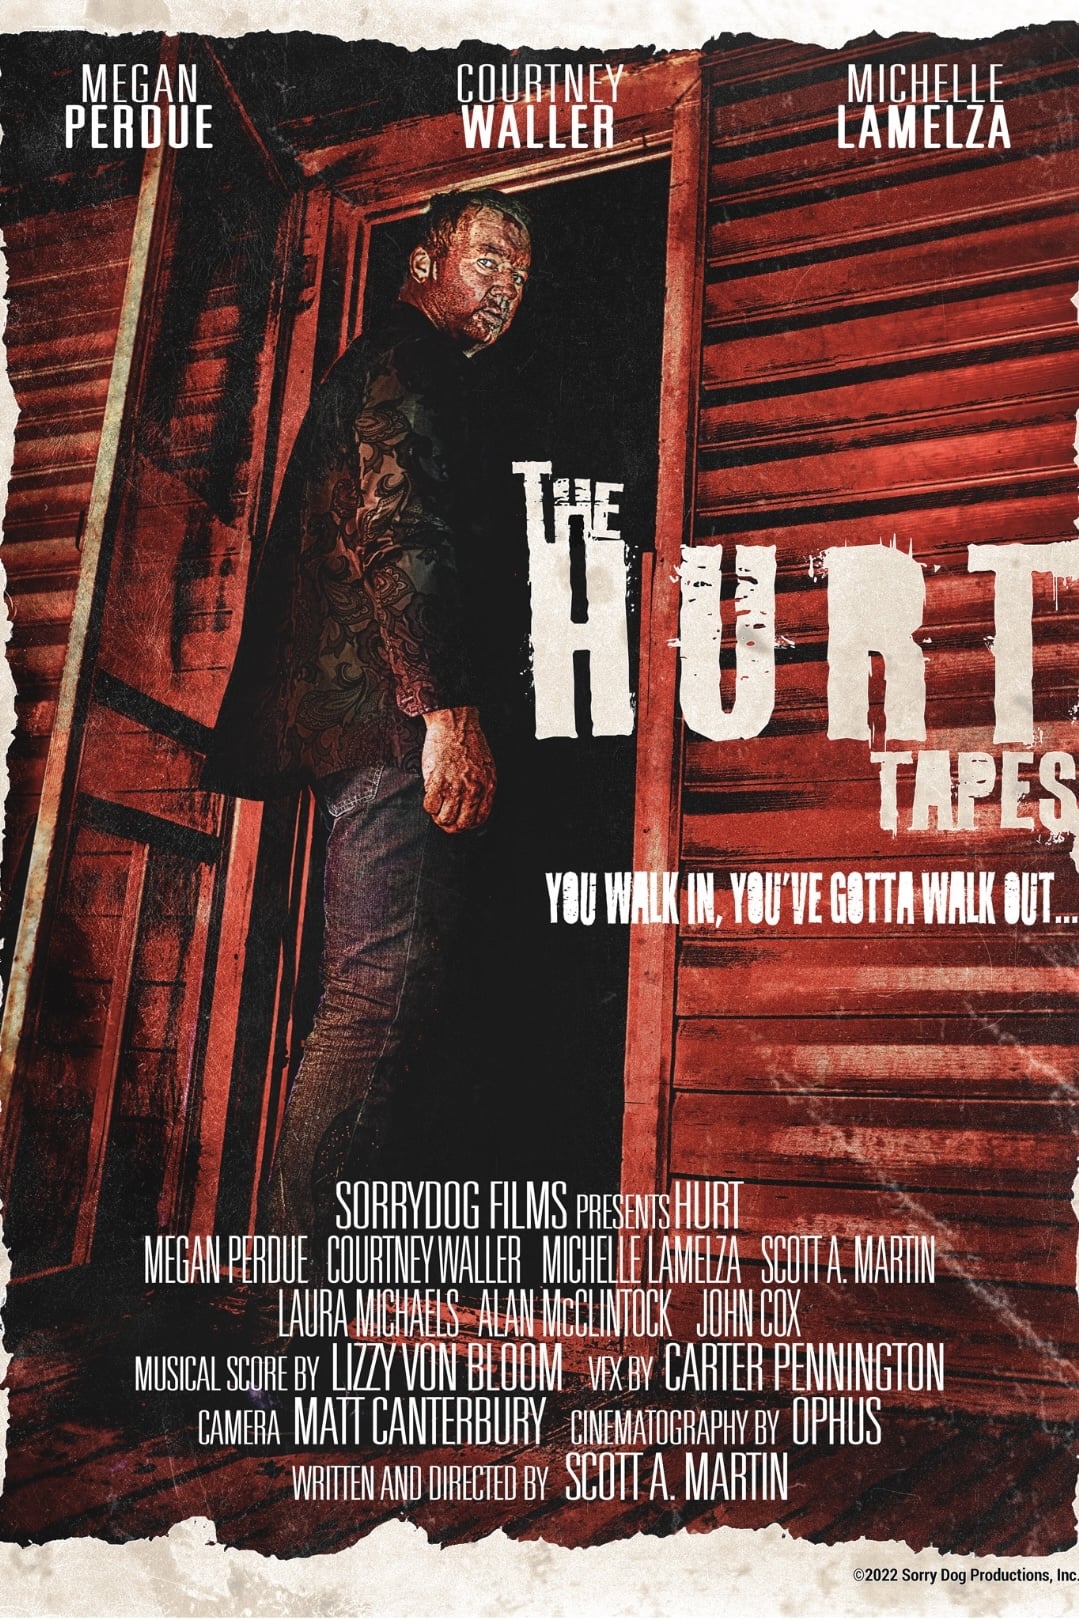 The Hurt Tapes